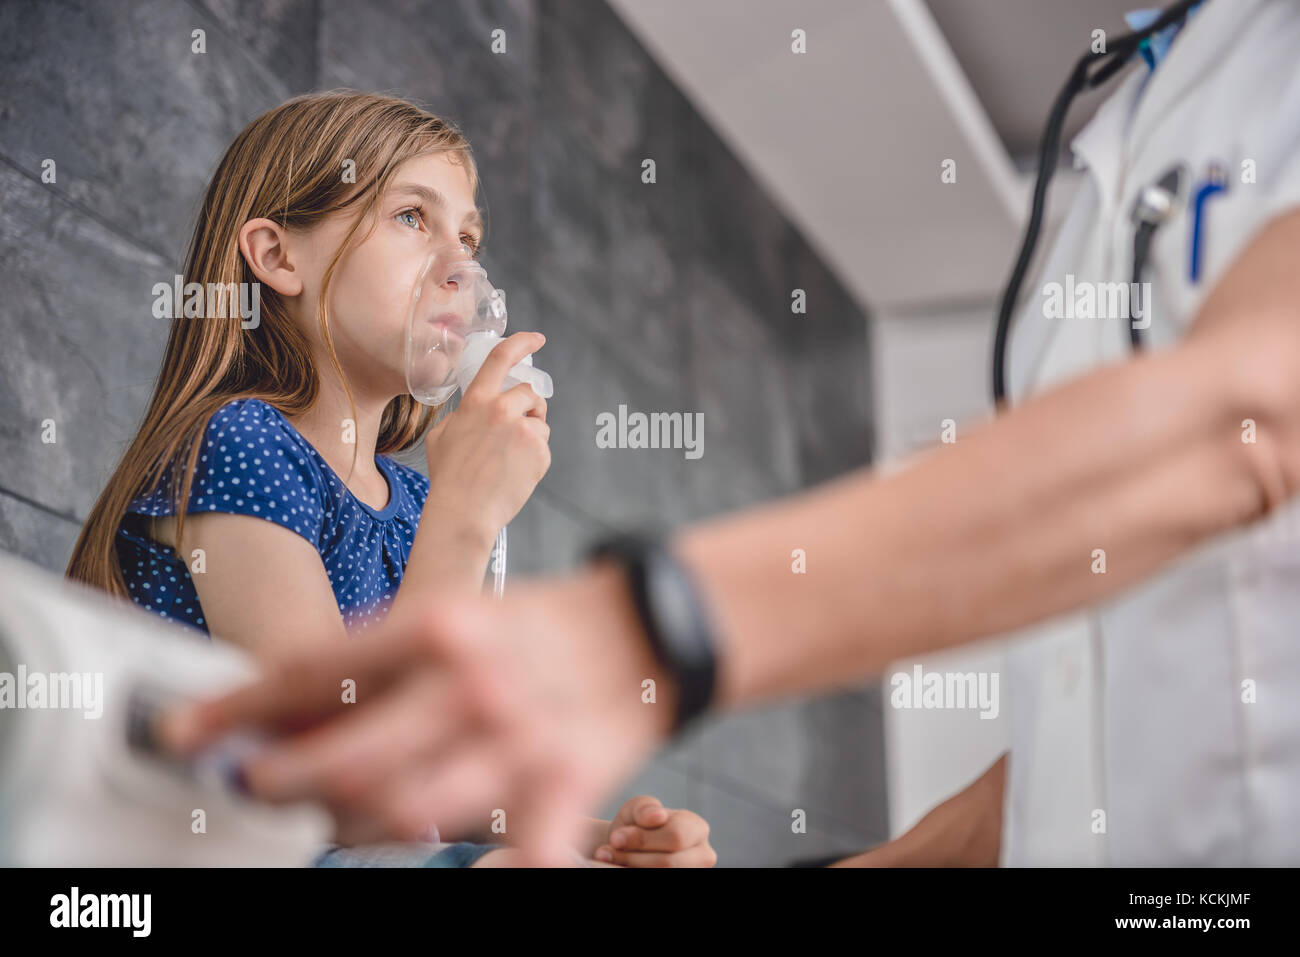 Little girl having a medical inhalation treatment with a nebulizer at the hospital Stock Photo